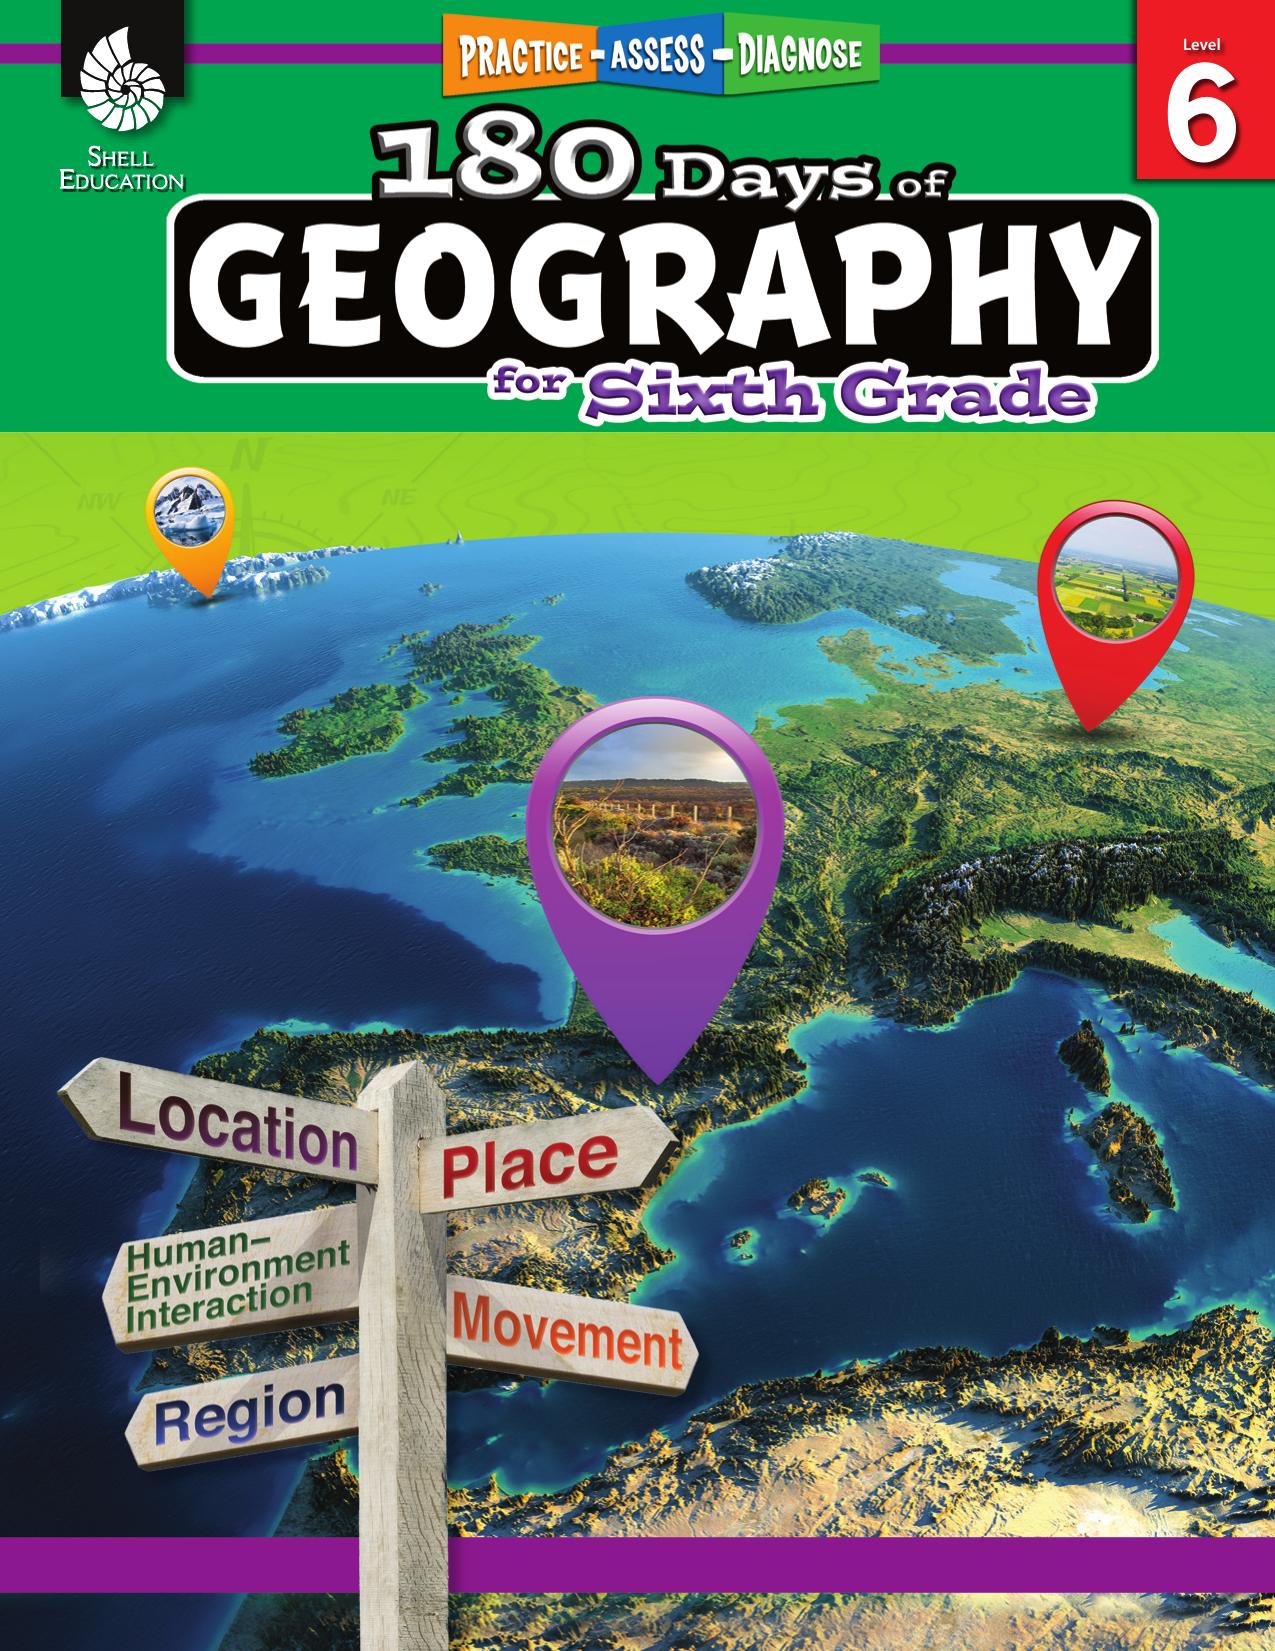 180 Days of Geography for Sixth Grade: Practice, Assess, Diagnose by Jennifer Edgerton